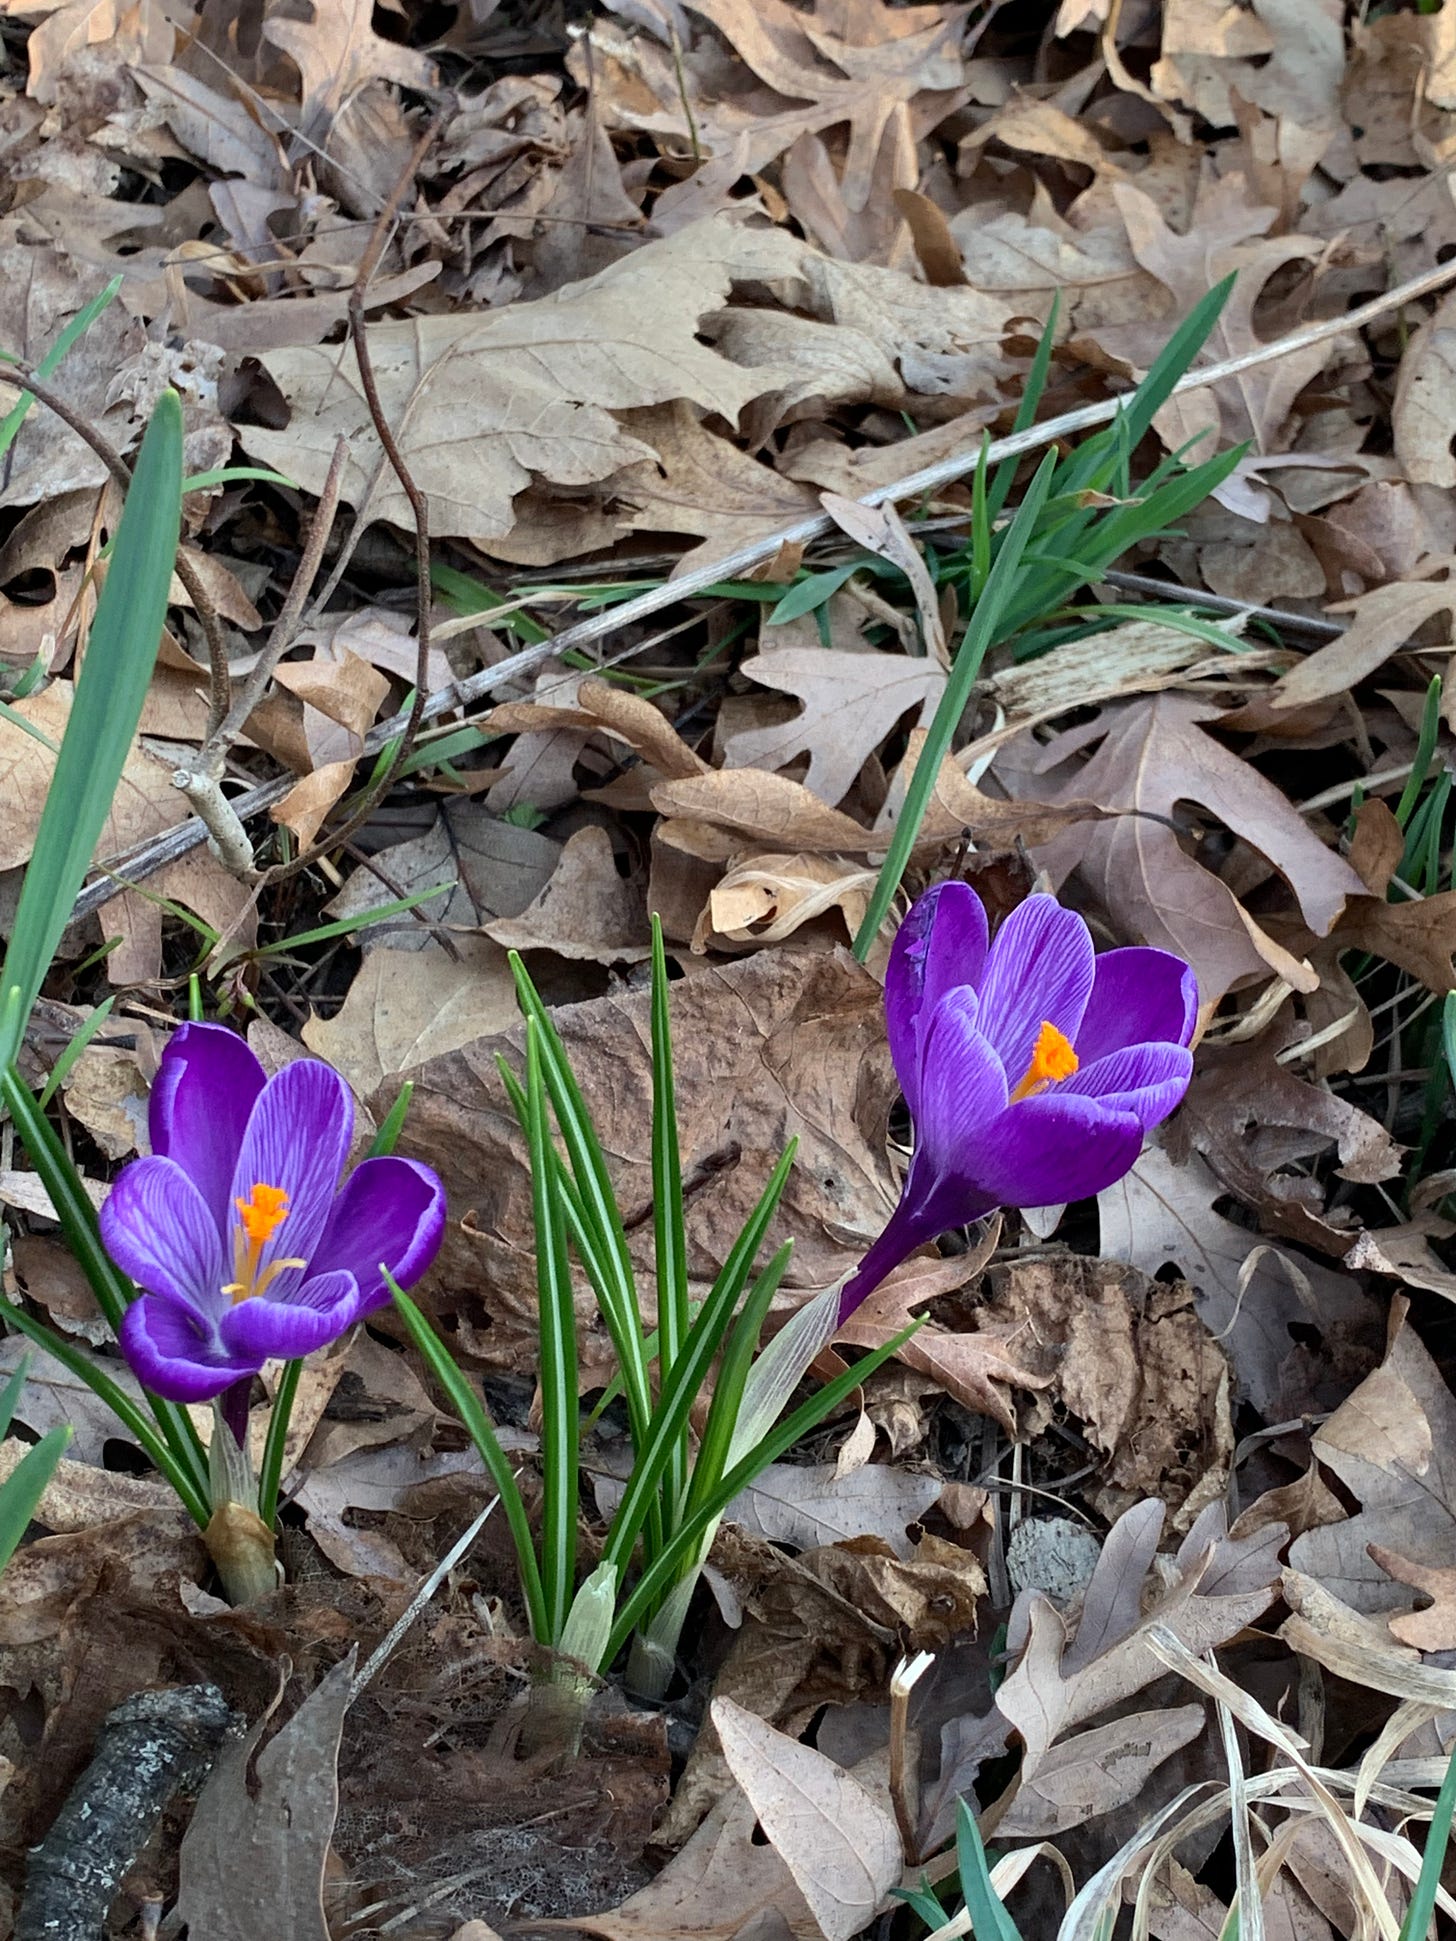 Bright violet flowers with bright orange stamens popping out through the fallen leaves of last fall